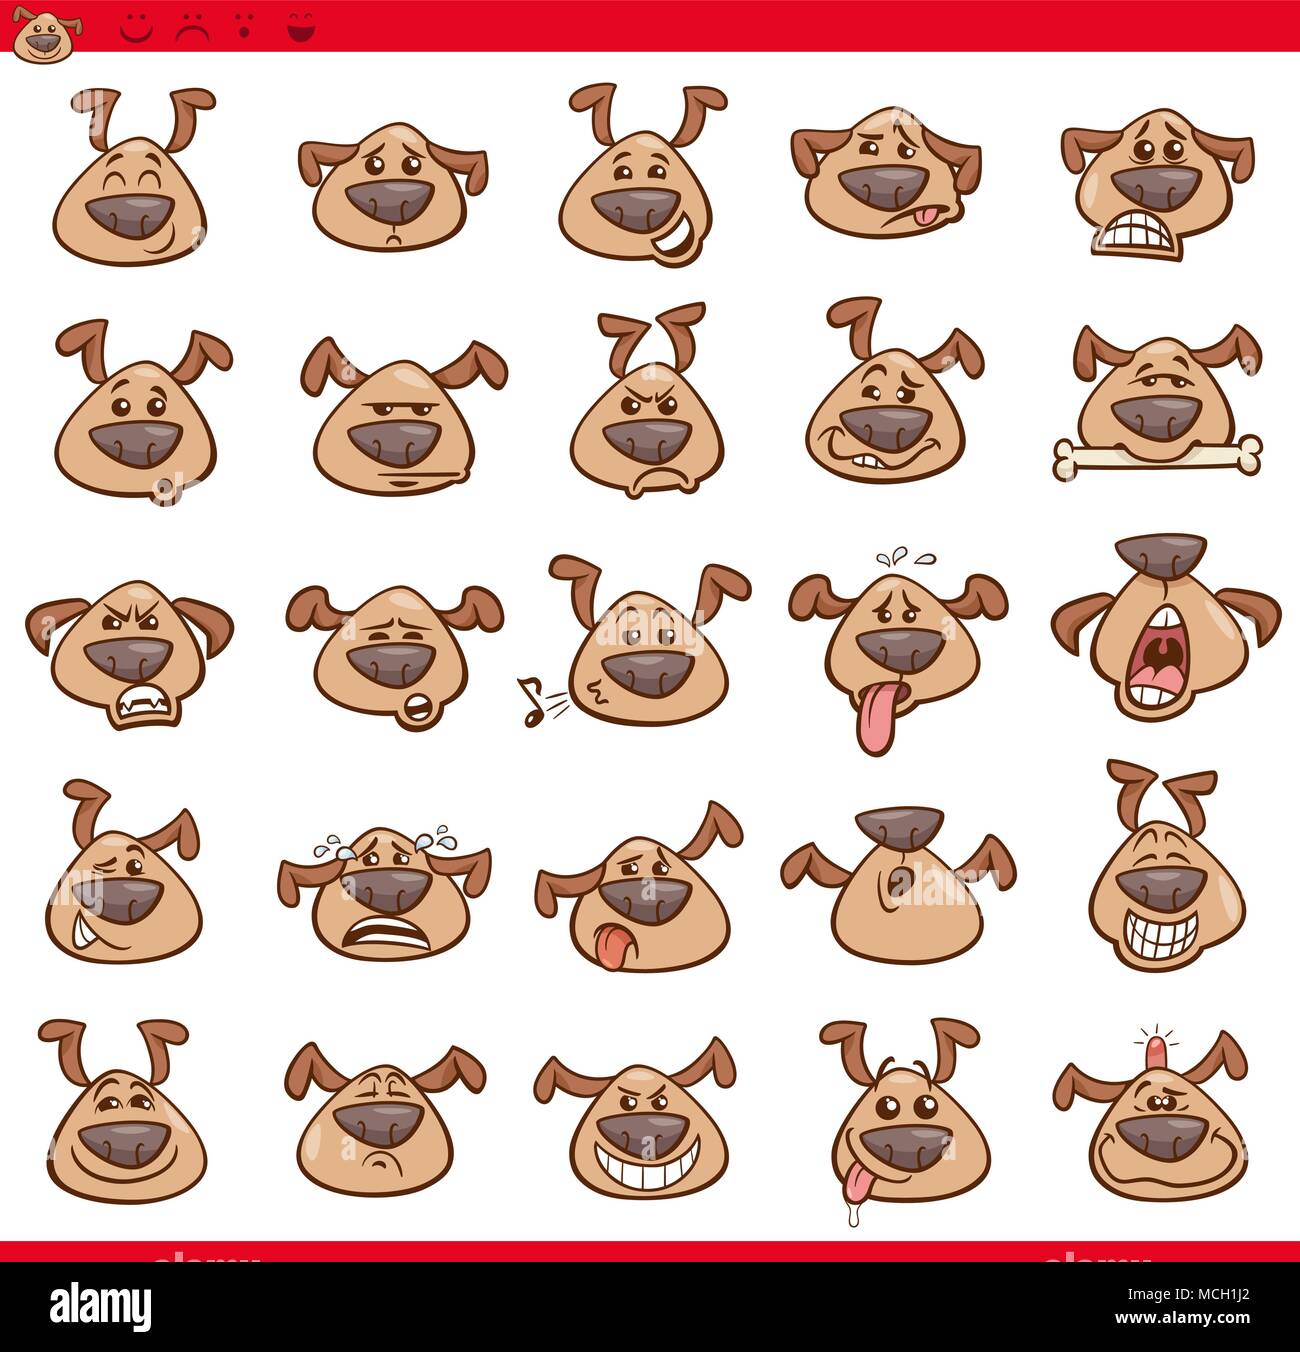 Cartoon Illustration of Funny Dogs Expressing Emotions or Emoji Icons Set Stock Vector